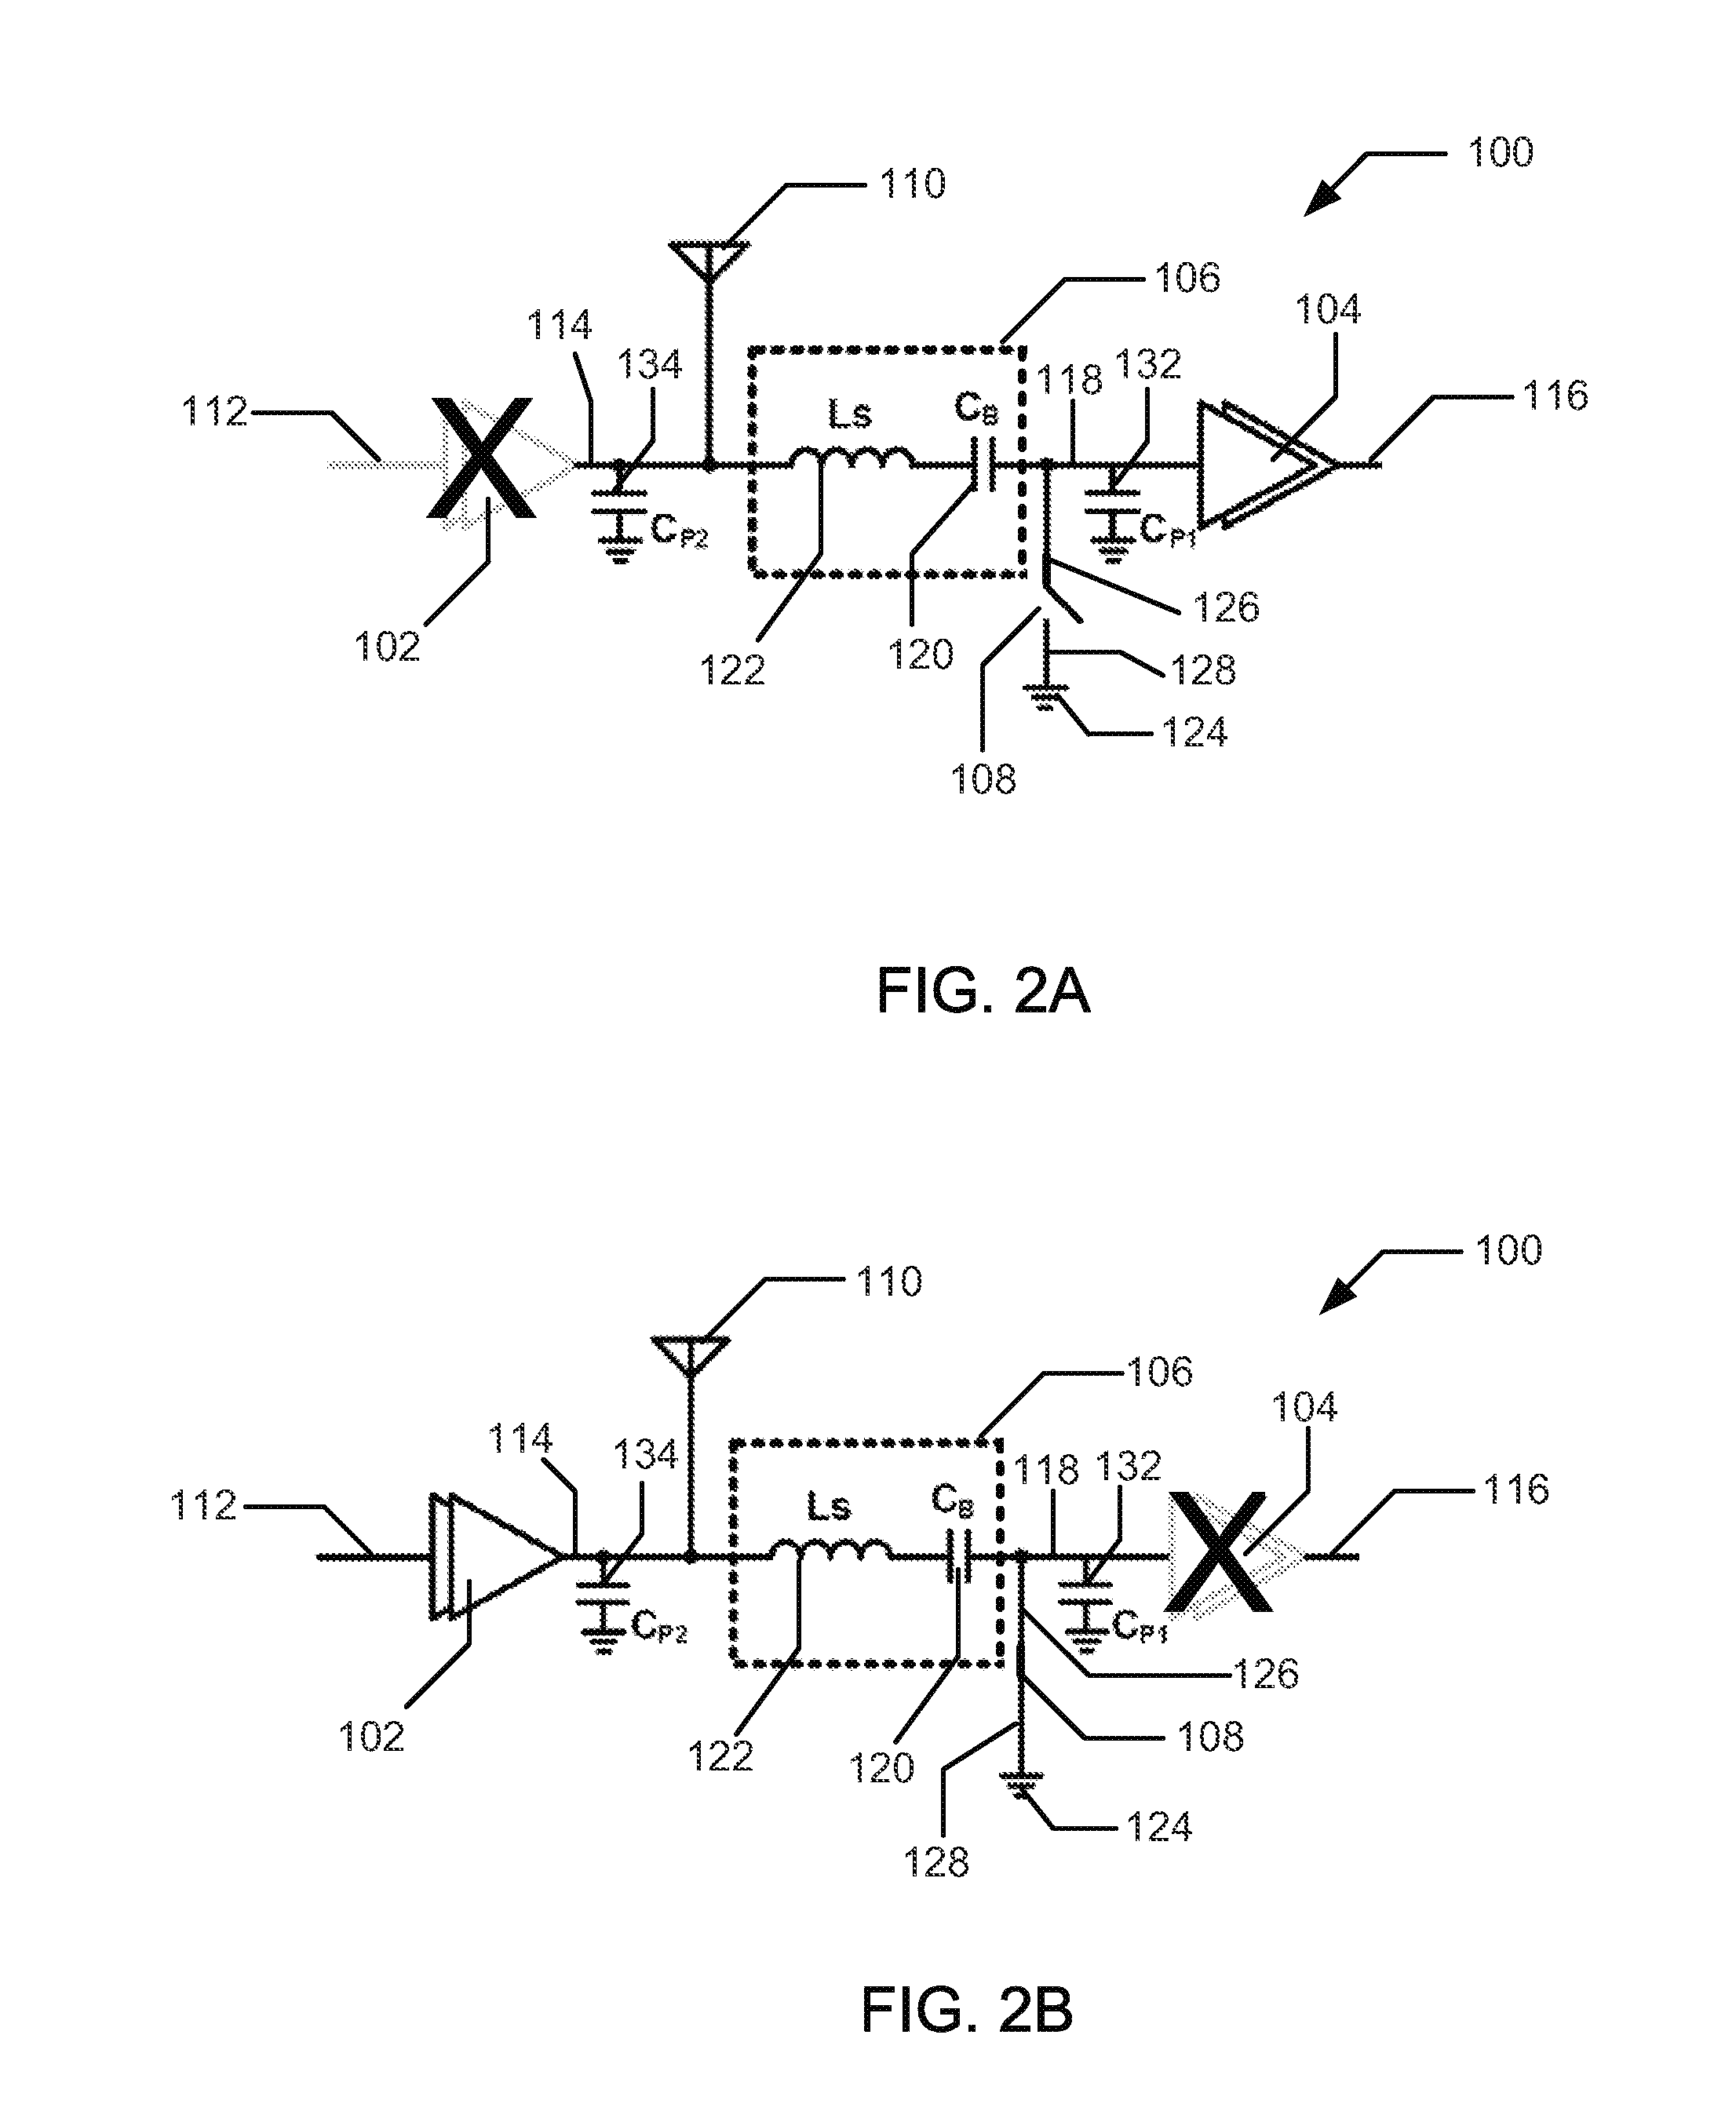 Transceiver with an integrated rx/tx configurable passive network